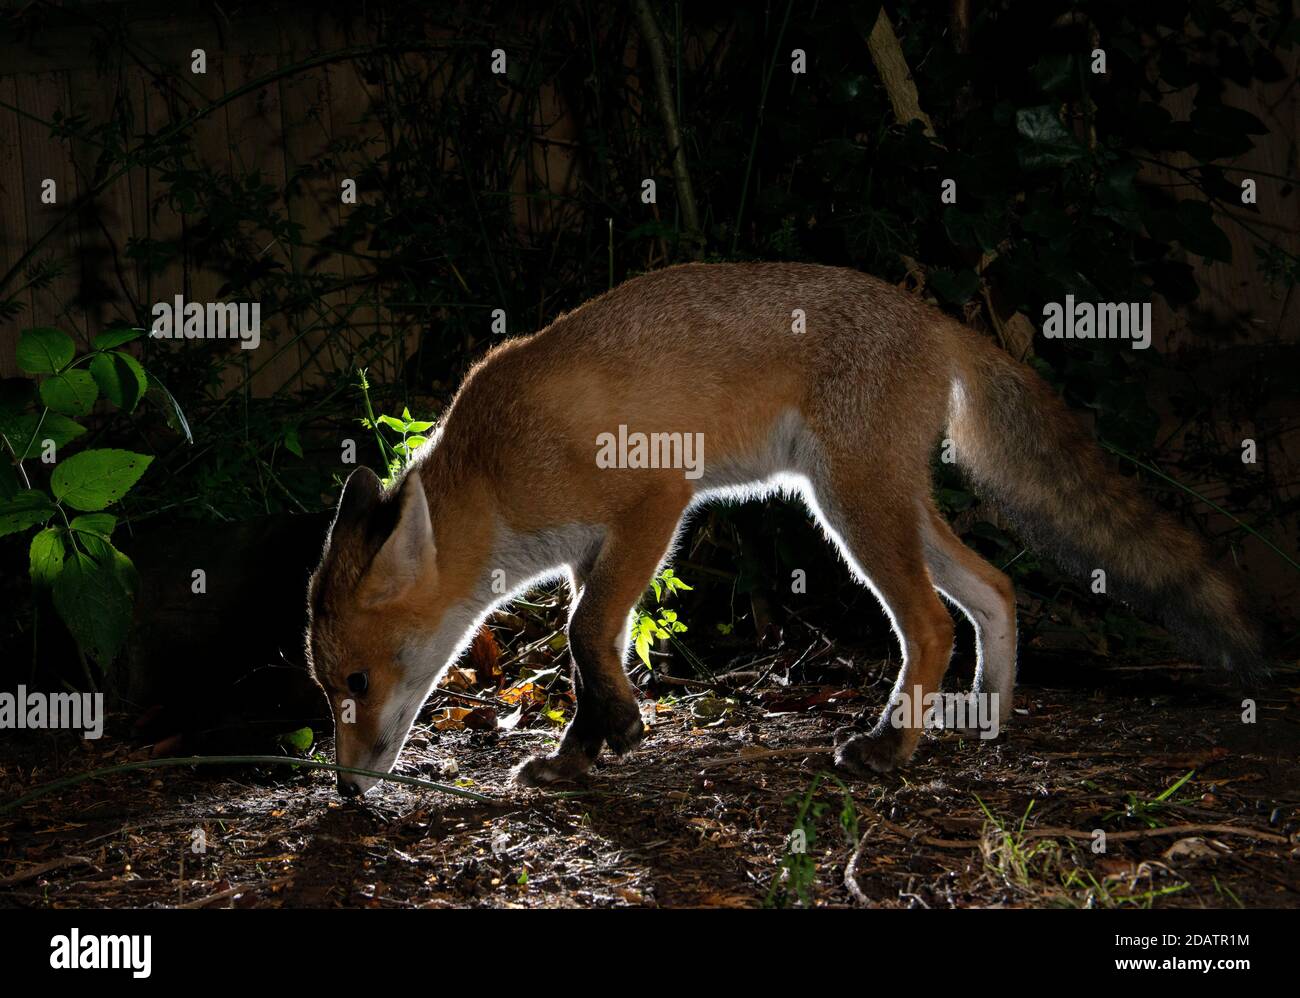 Fox at night in darkness searching for food or scent of prey with it's nose on the ground, rim light around part of the body with darkness around it Stock Photo